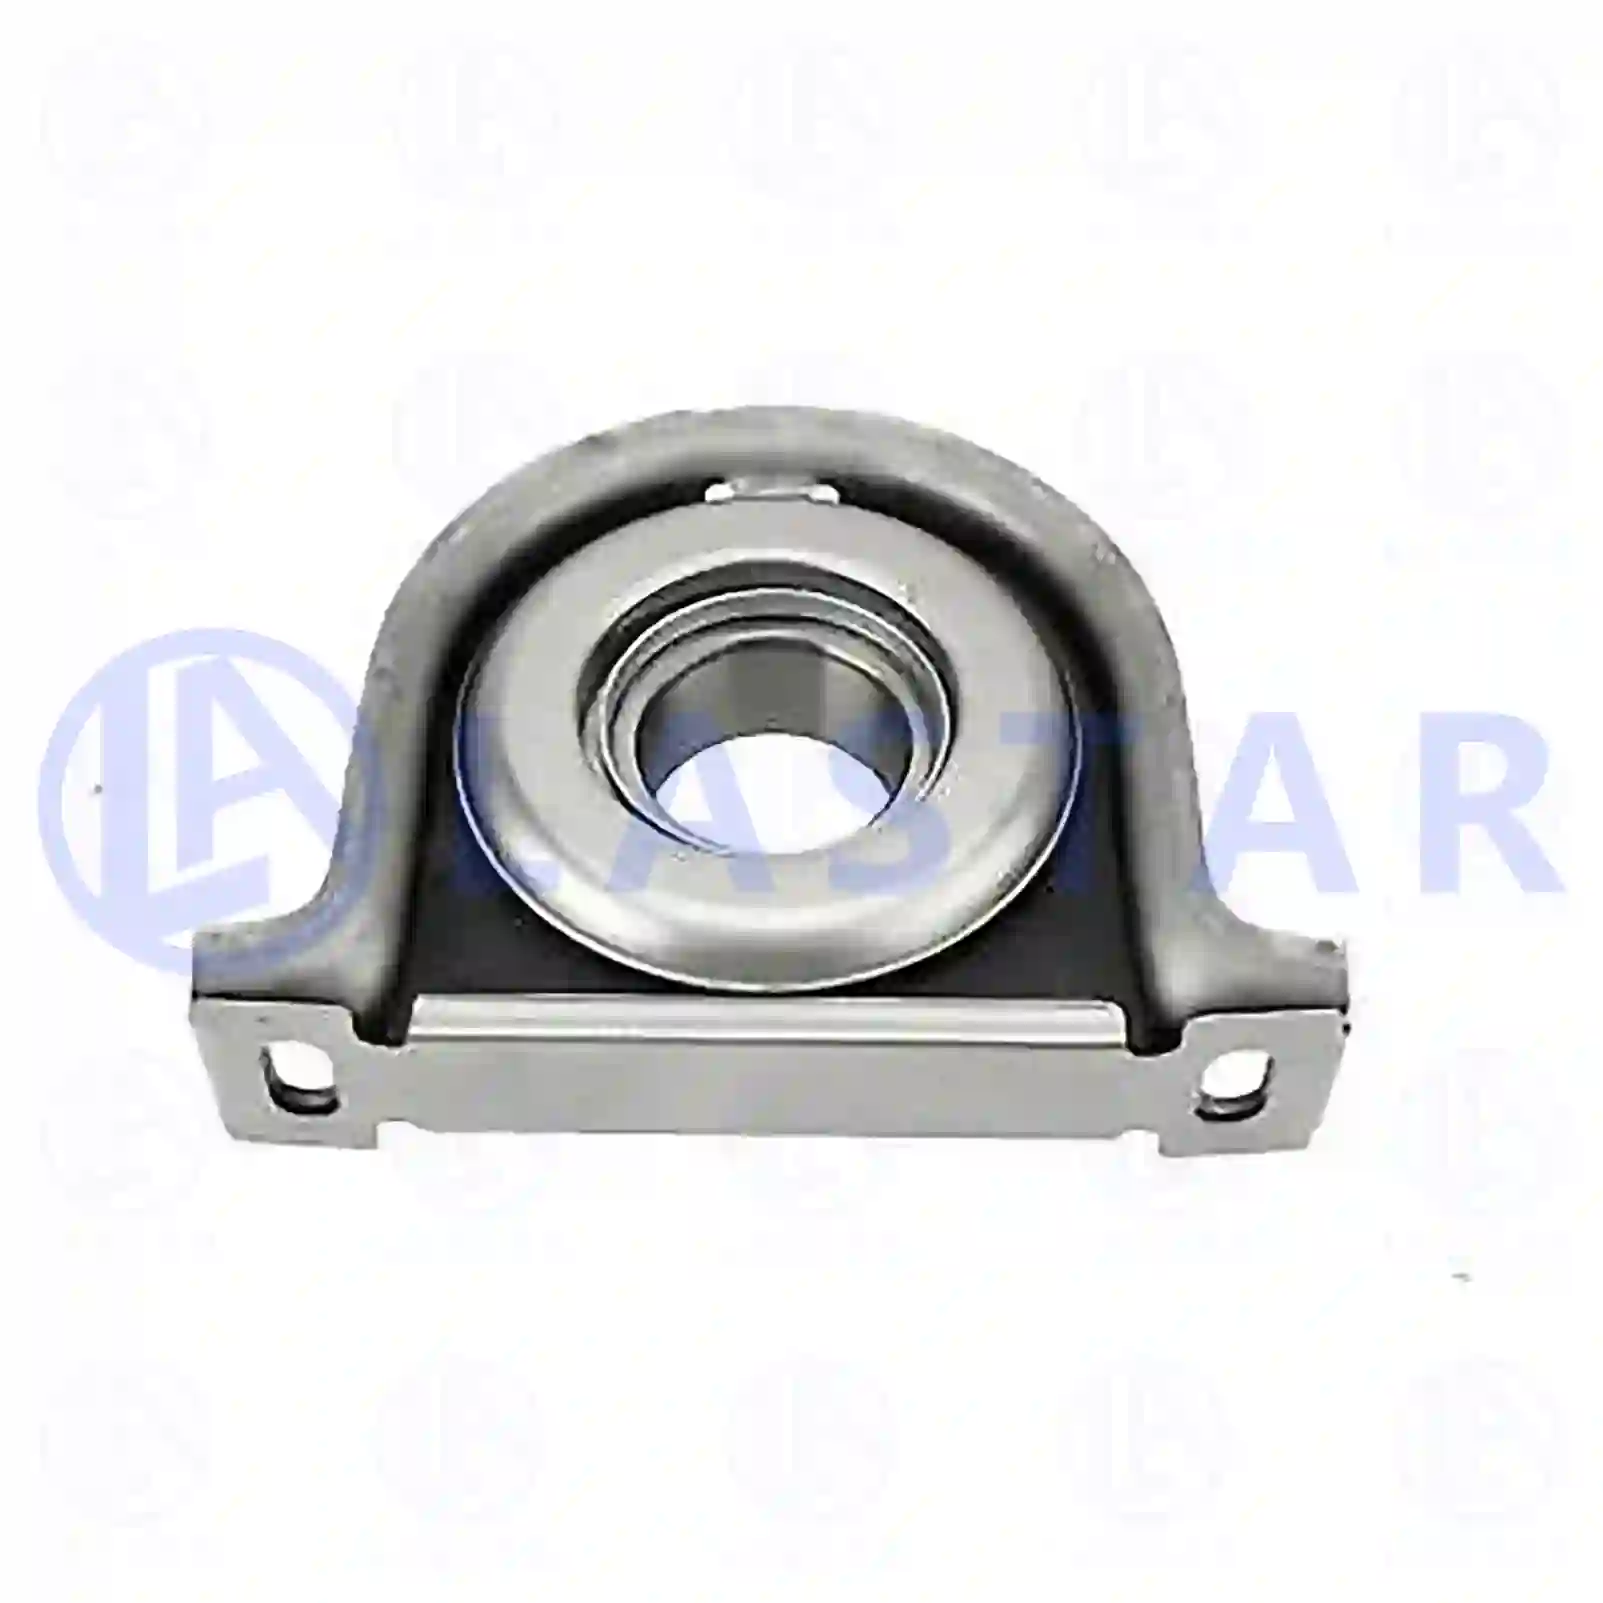 Support Bearing Center bearing, la no: 77734325 ,  oem no:5000816925 Lastar Spare Part | Truck Spare Parts, Auotomotive Spare Parts